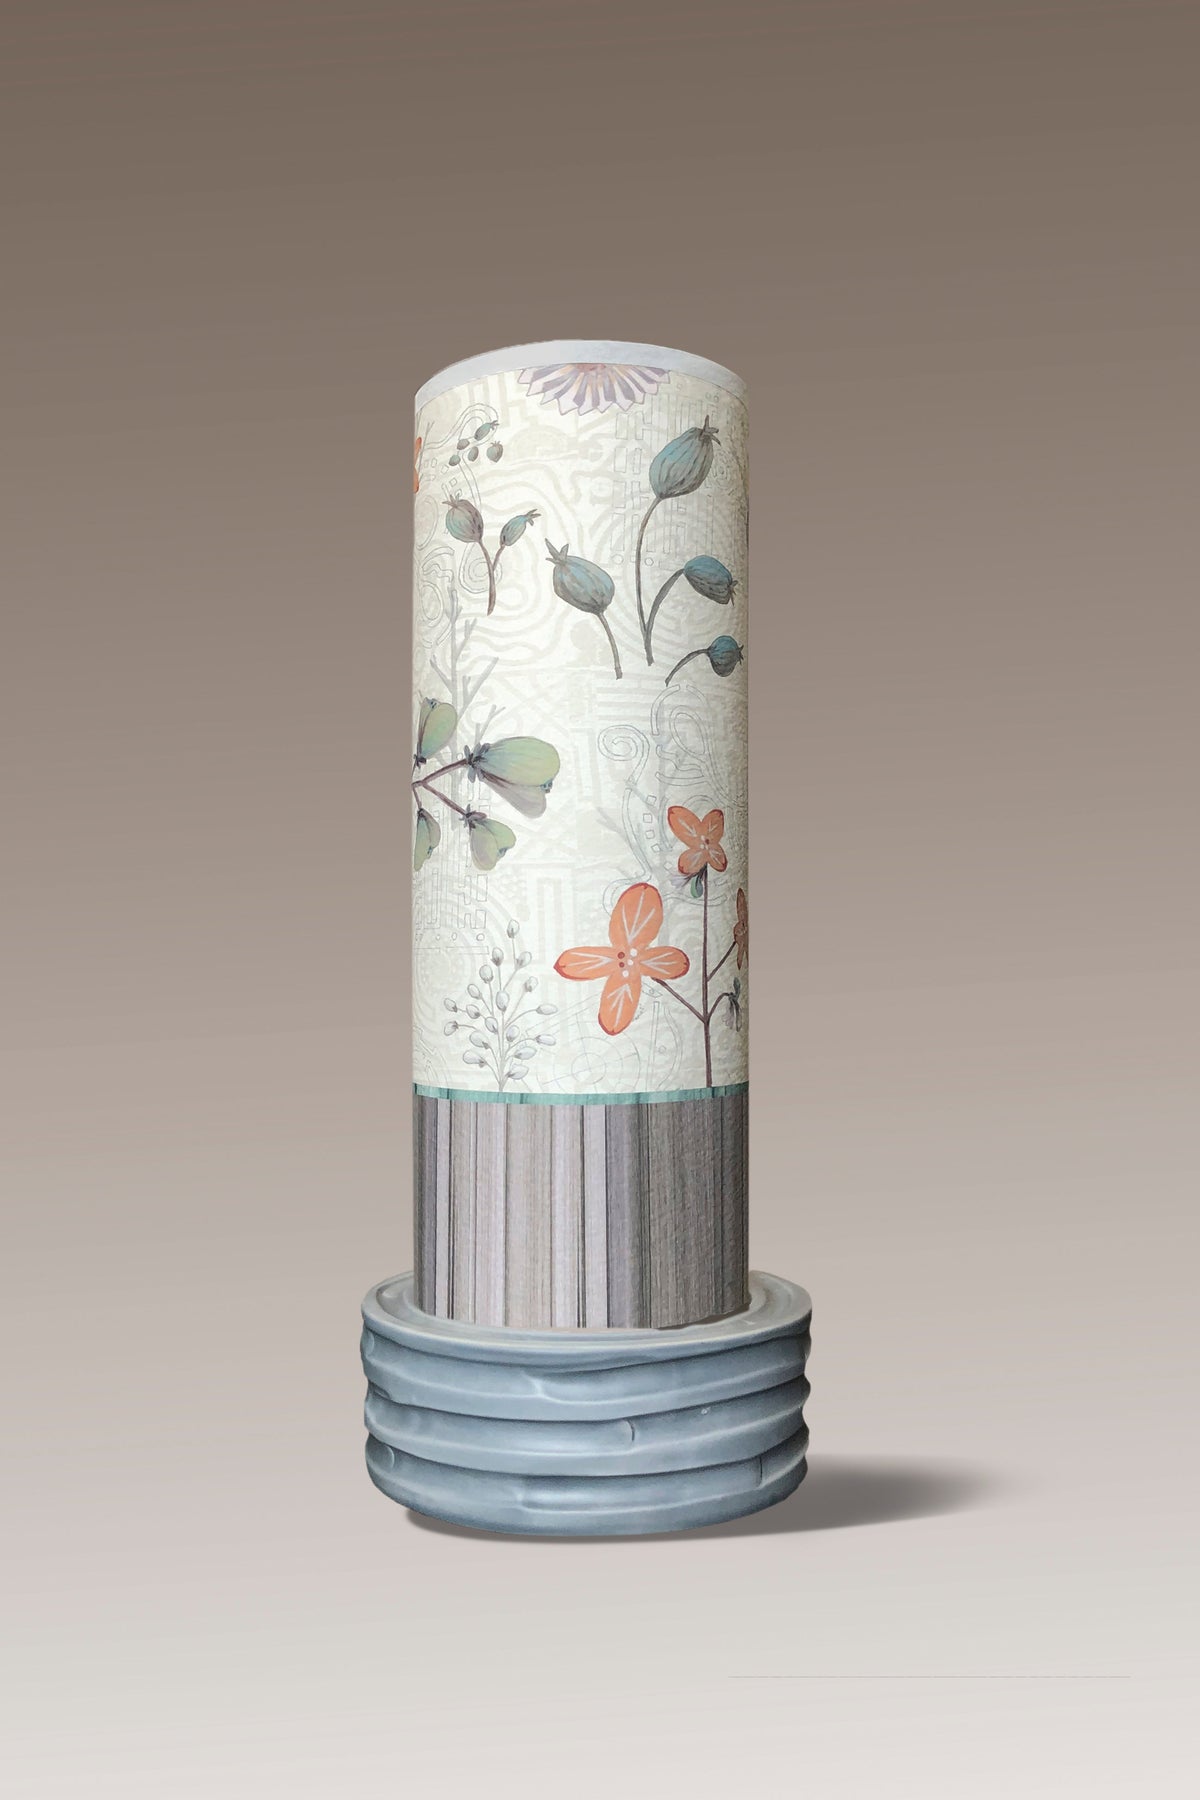 Janna Ugone &amp; Co Luminaires Ceramic Luminaire Accent Lamp with Flora and Maze Shade